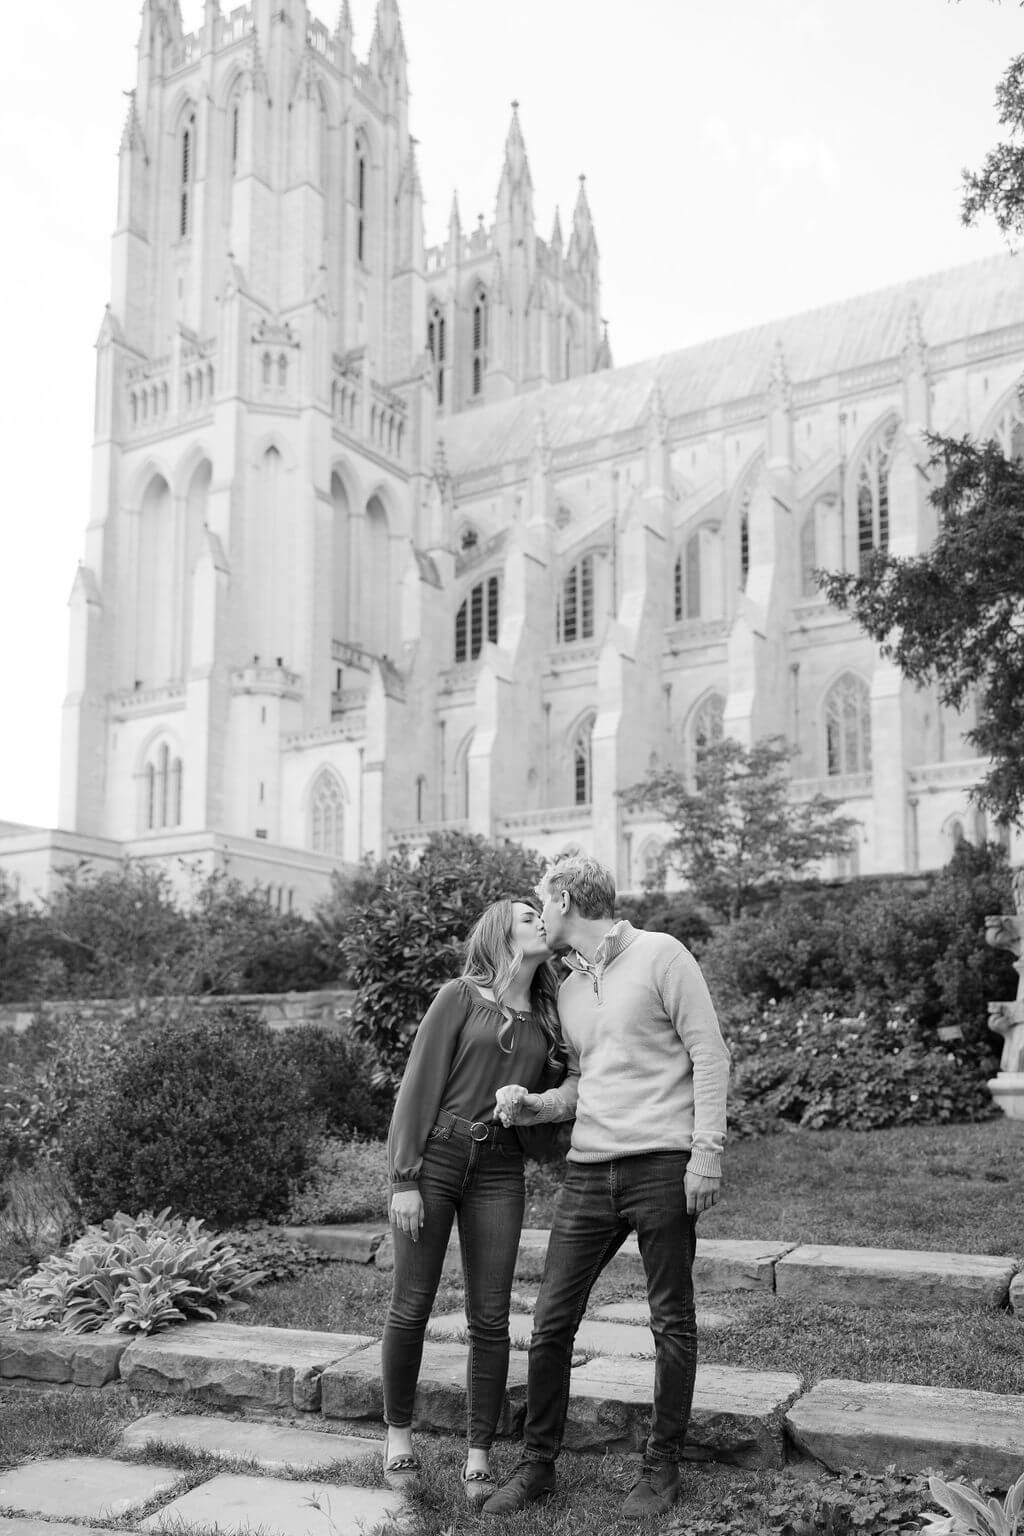 A black and white photo capturing a couple in a sweet embrace, with the iconic Washington National Cathedral towering in the background. The couple stands on a garden path, surrounded by lush greenery, symbolizing the growth and strength of their relationship. This image is part of an engagement session by Get Ready Photo, highlighting the beauty of Washington DC